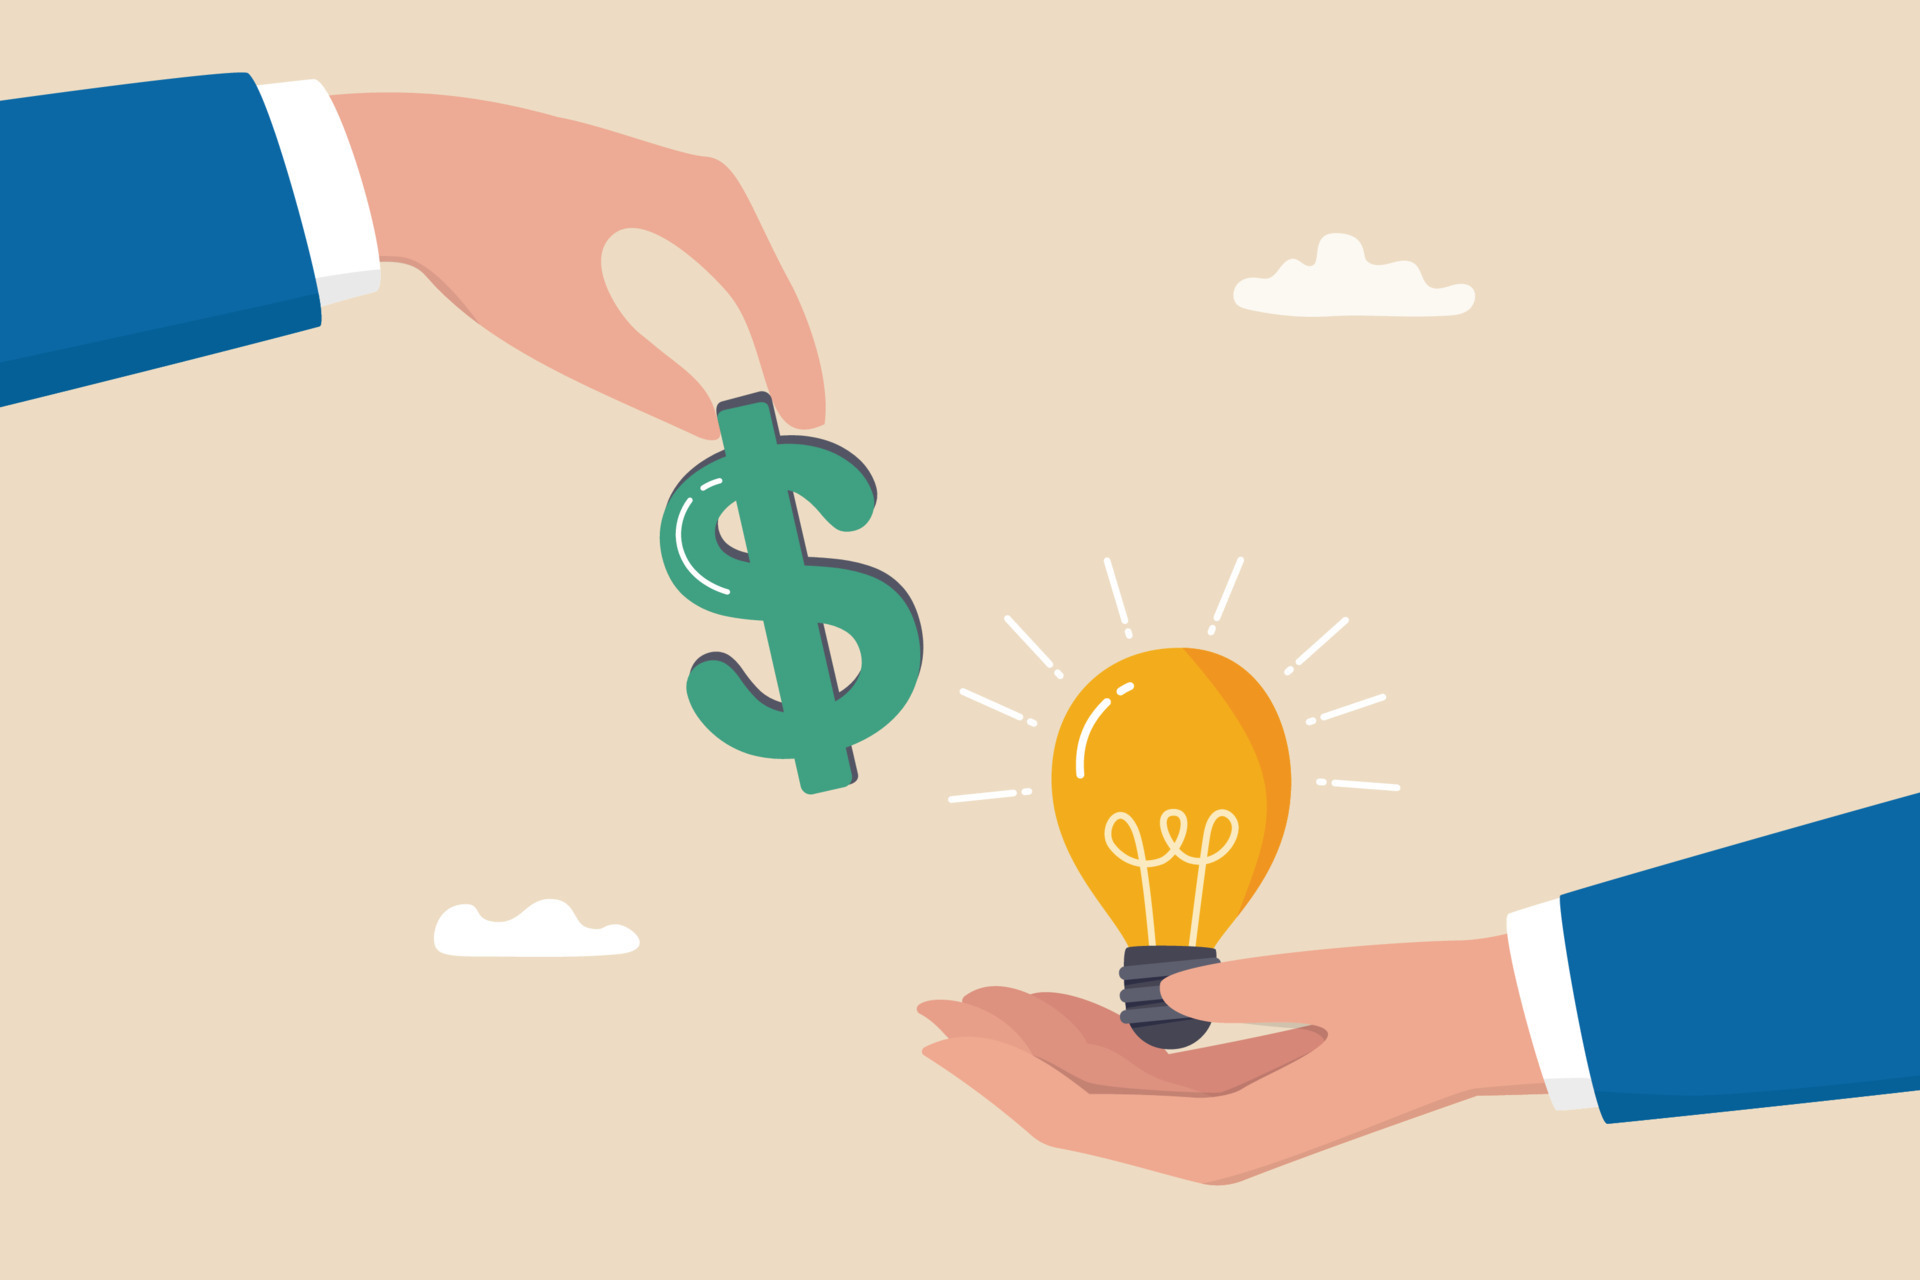 Three Crucial Mistakes VCs Make And How Entrepreneurs Can Leverage Them To Improve Fundraising